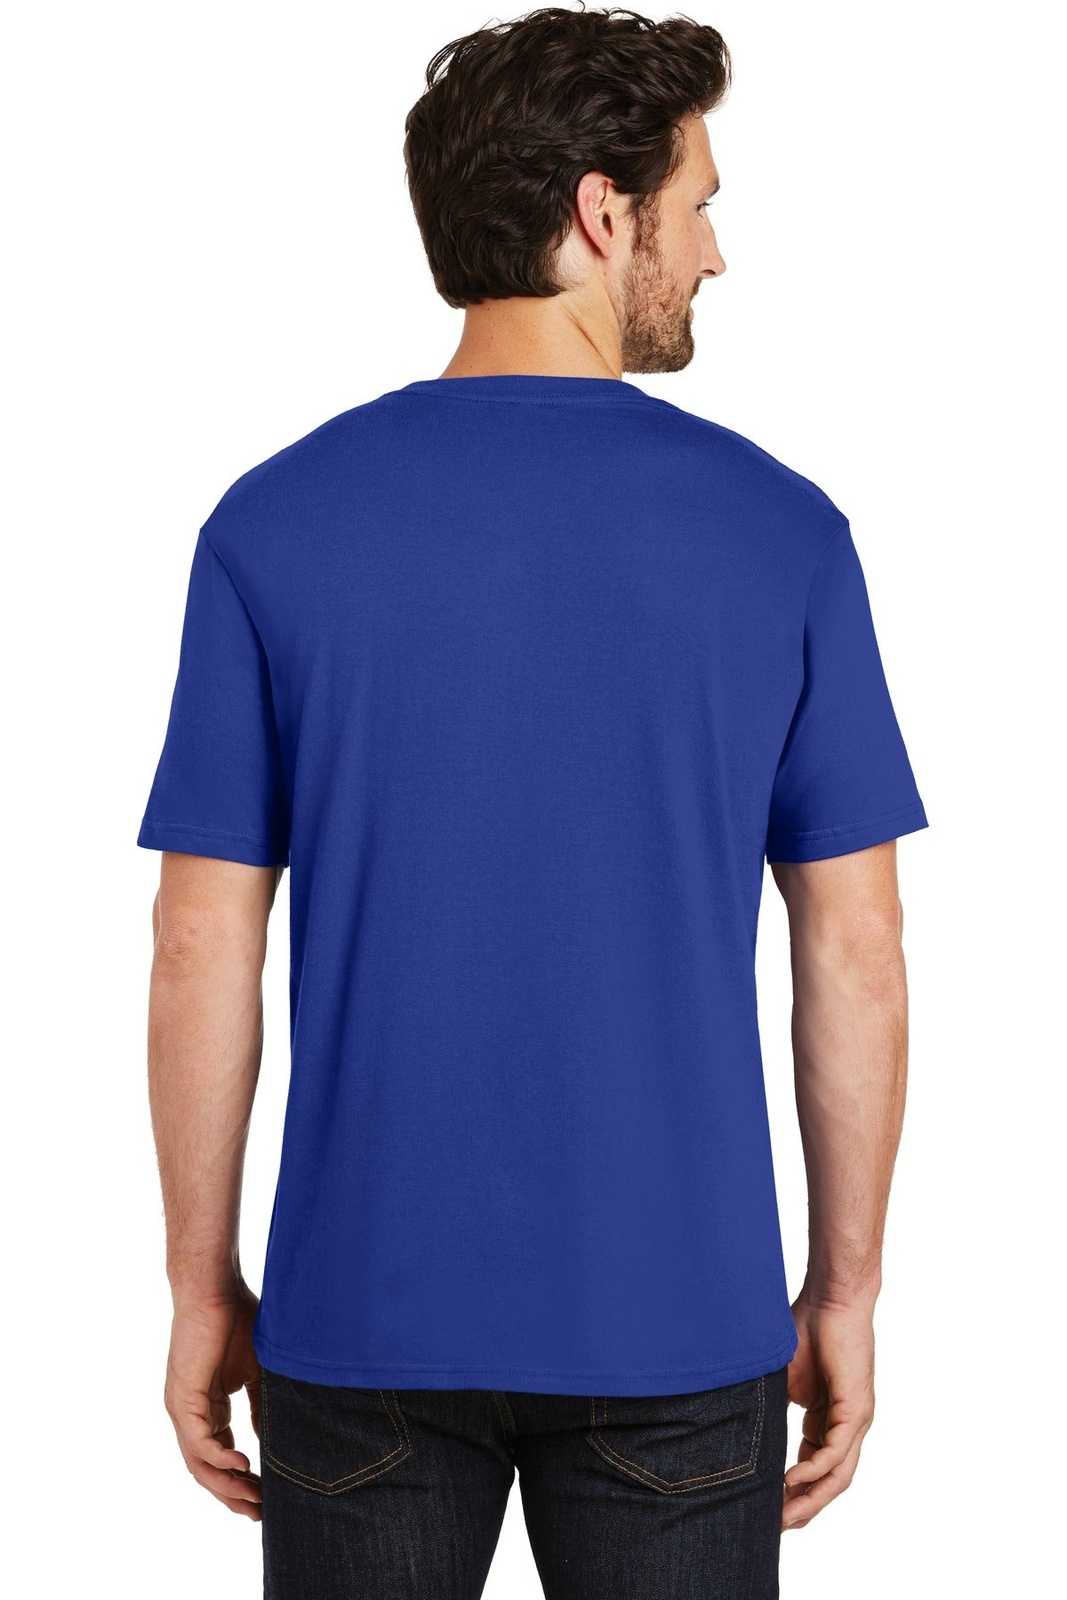 District DT104 Perfect Weight Tee - Deep Royal - HIT a Double - 2